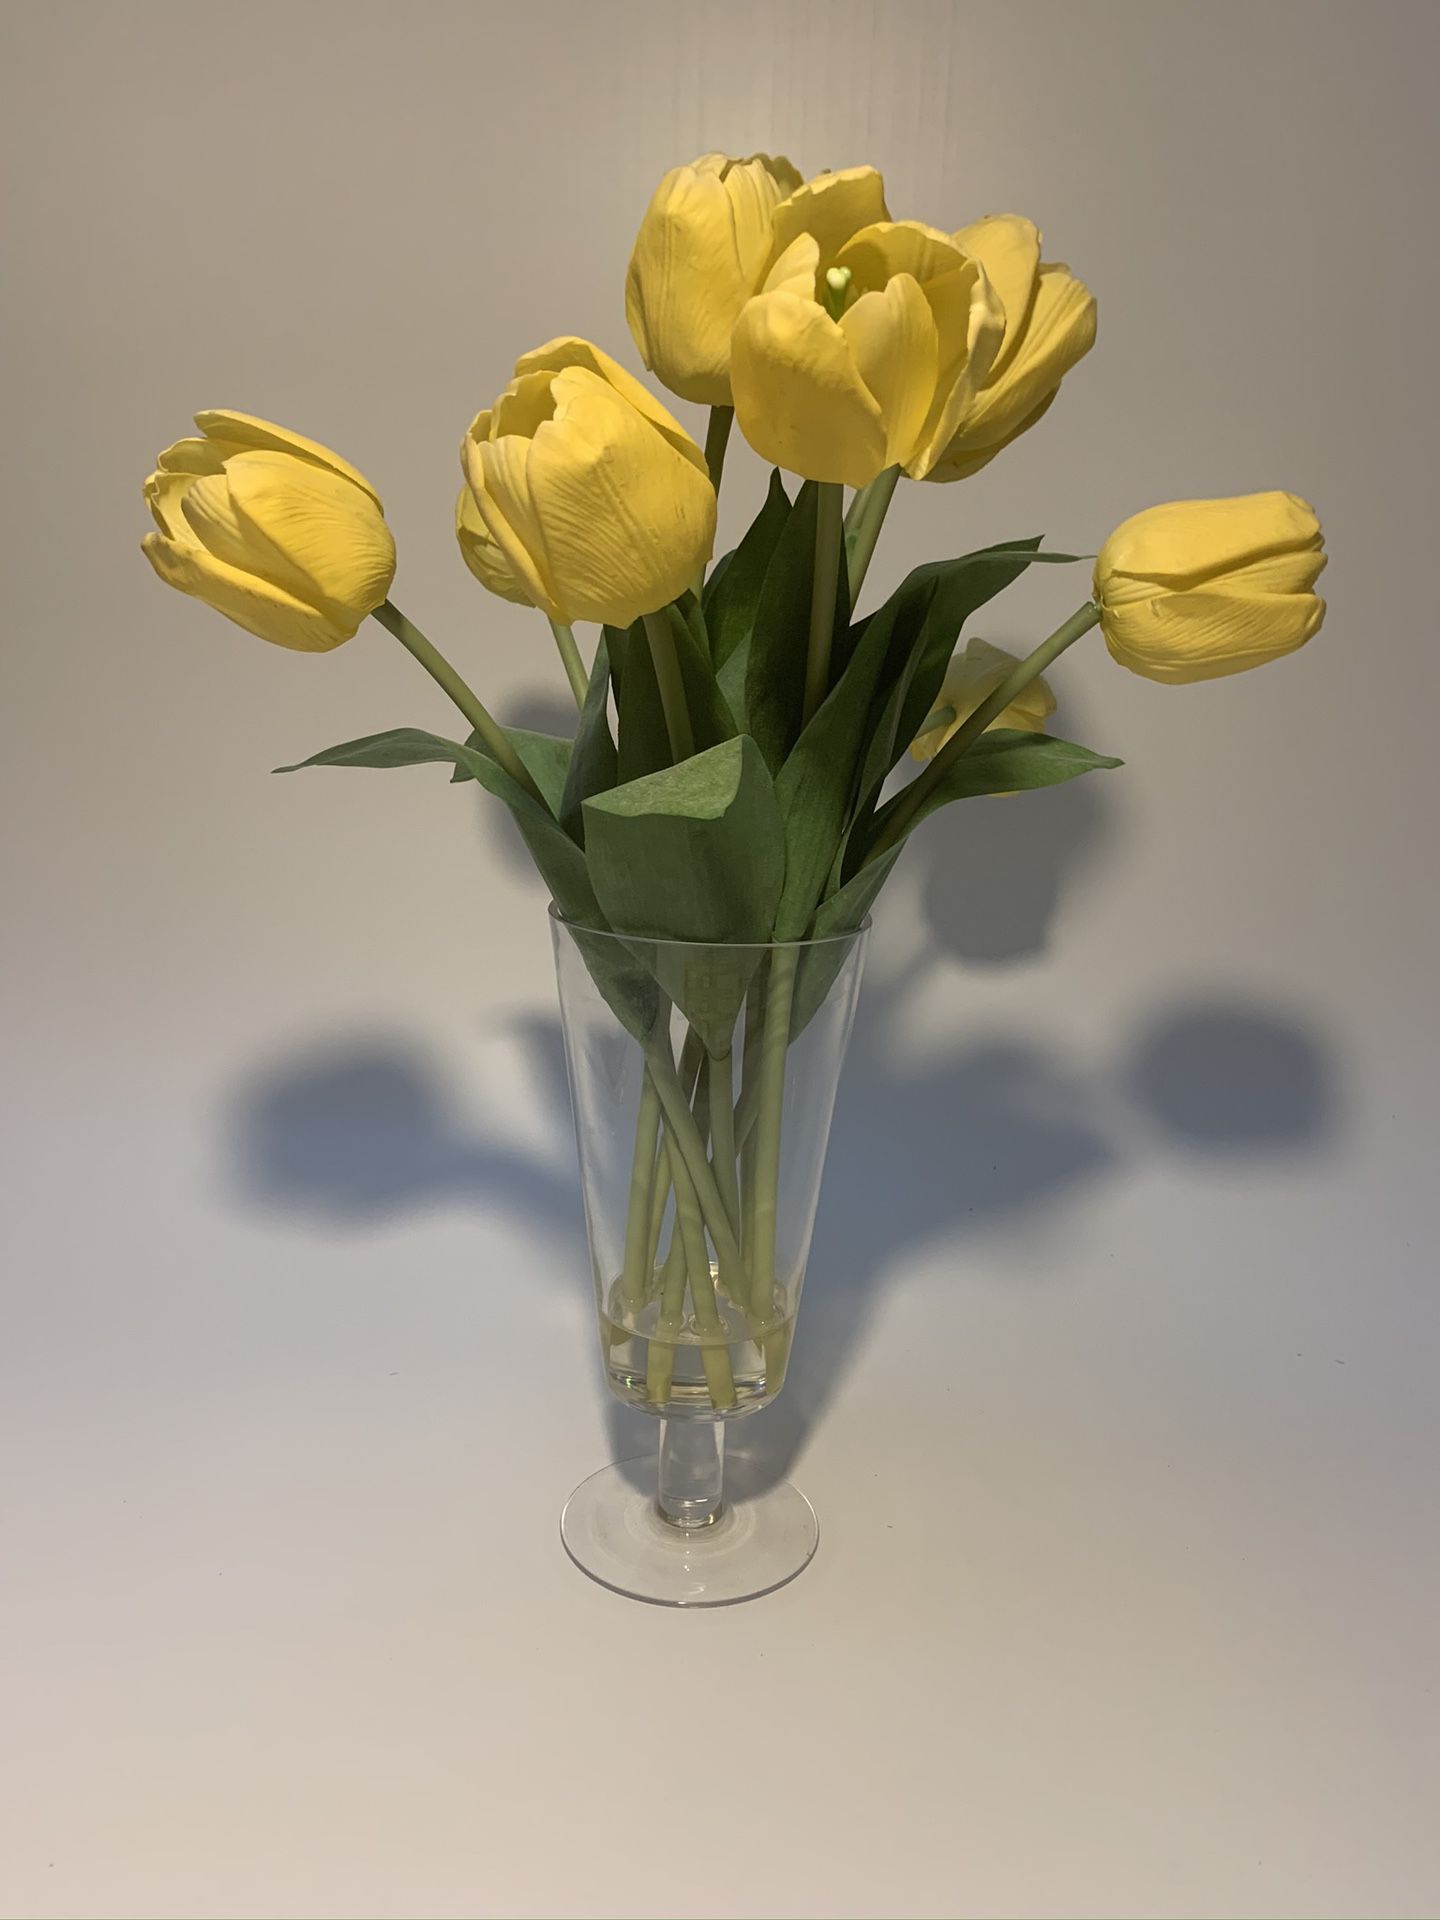 Artificial flowers - yellow tulips in a vase